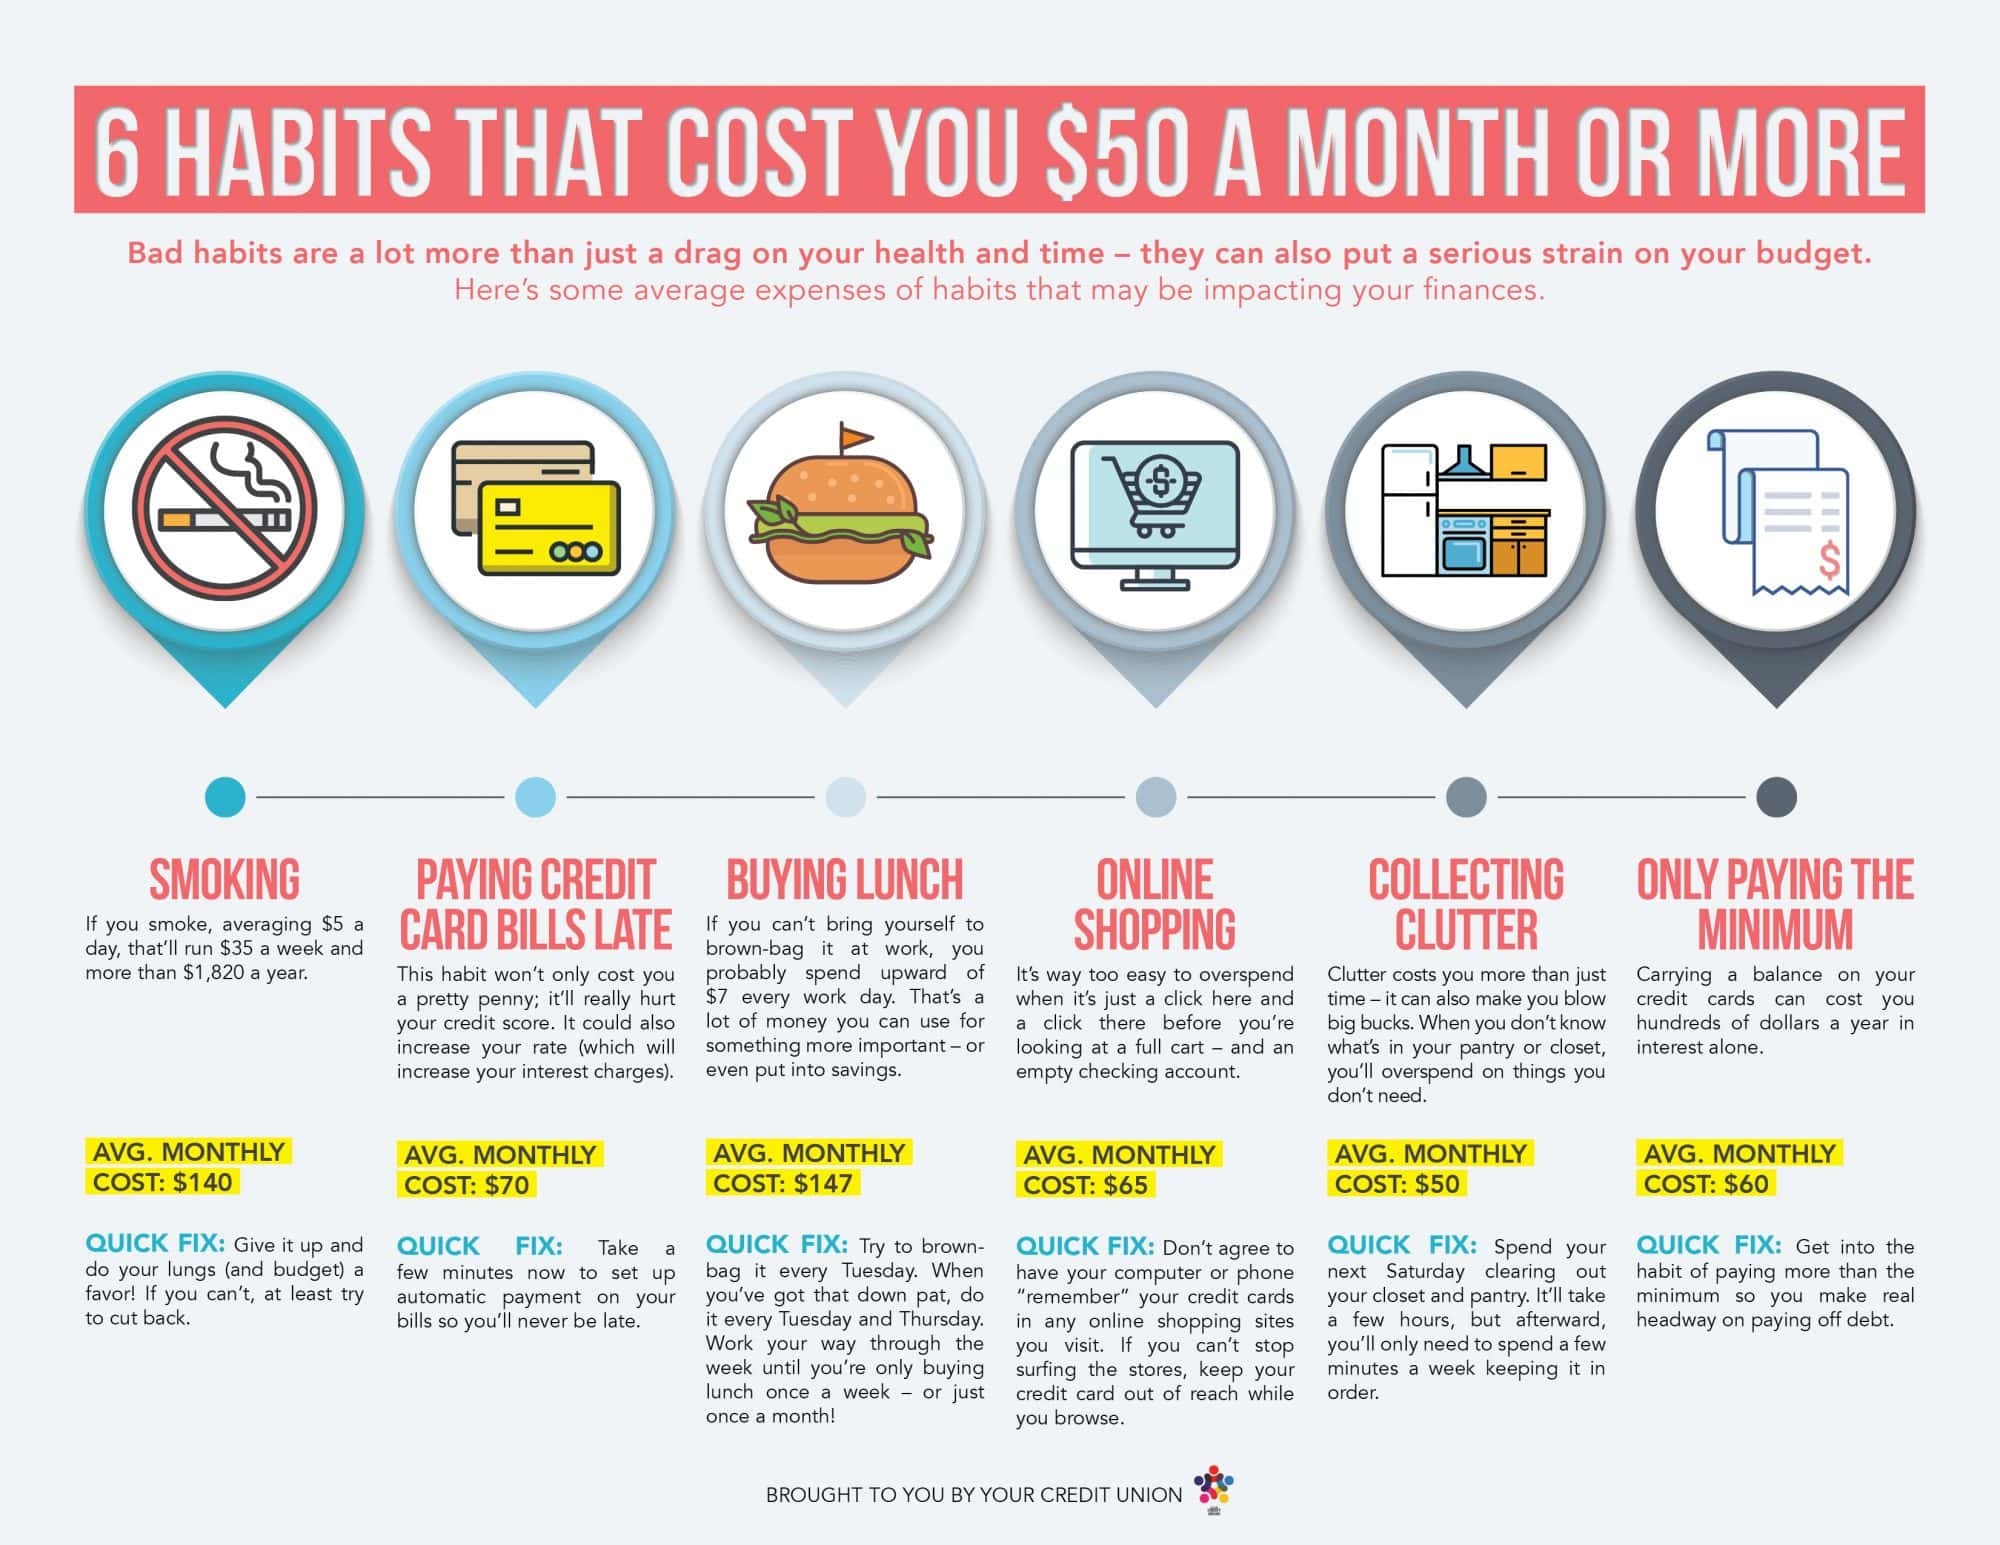 6 bad habits that can cost you $50 or more